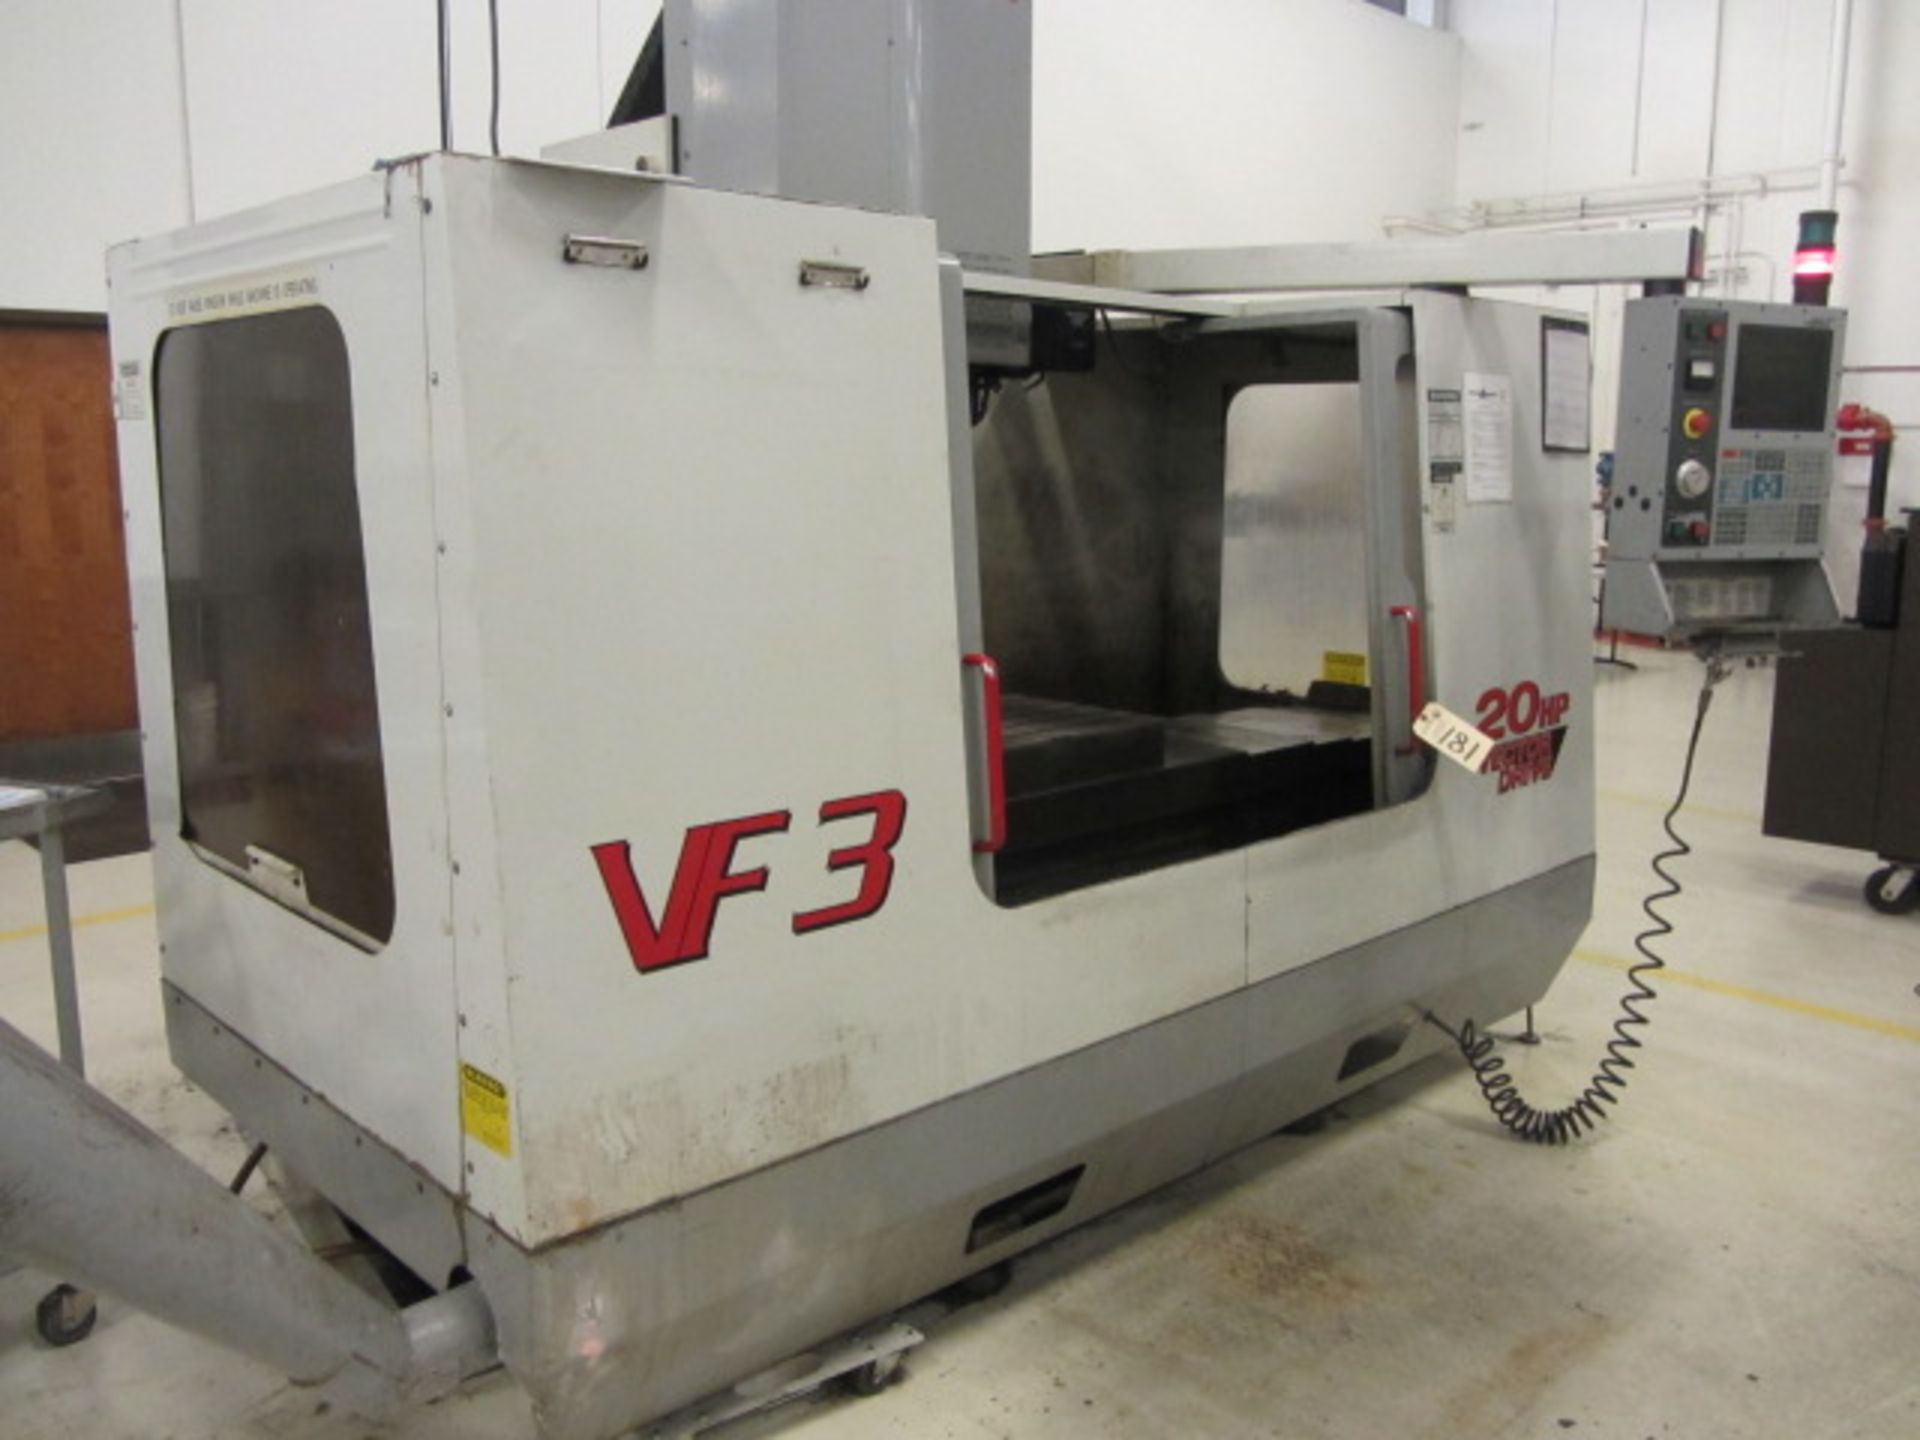 Haas VF-3B CNC Vertical Machining Center with 48'' x 18'' Table, #40 Taper Spindle Speeds to 7500 - Image 5 of 7